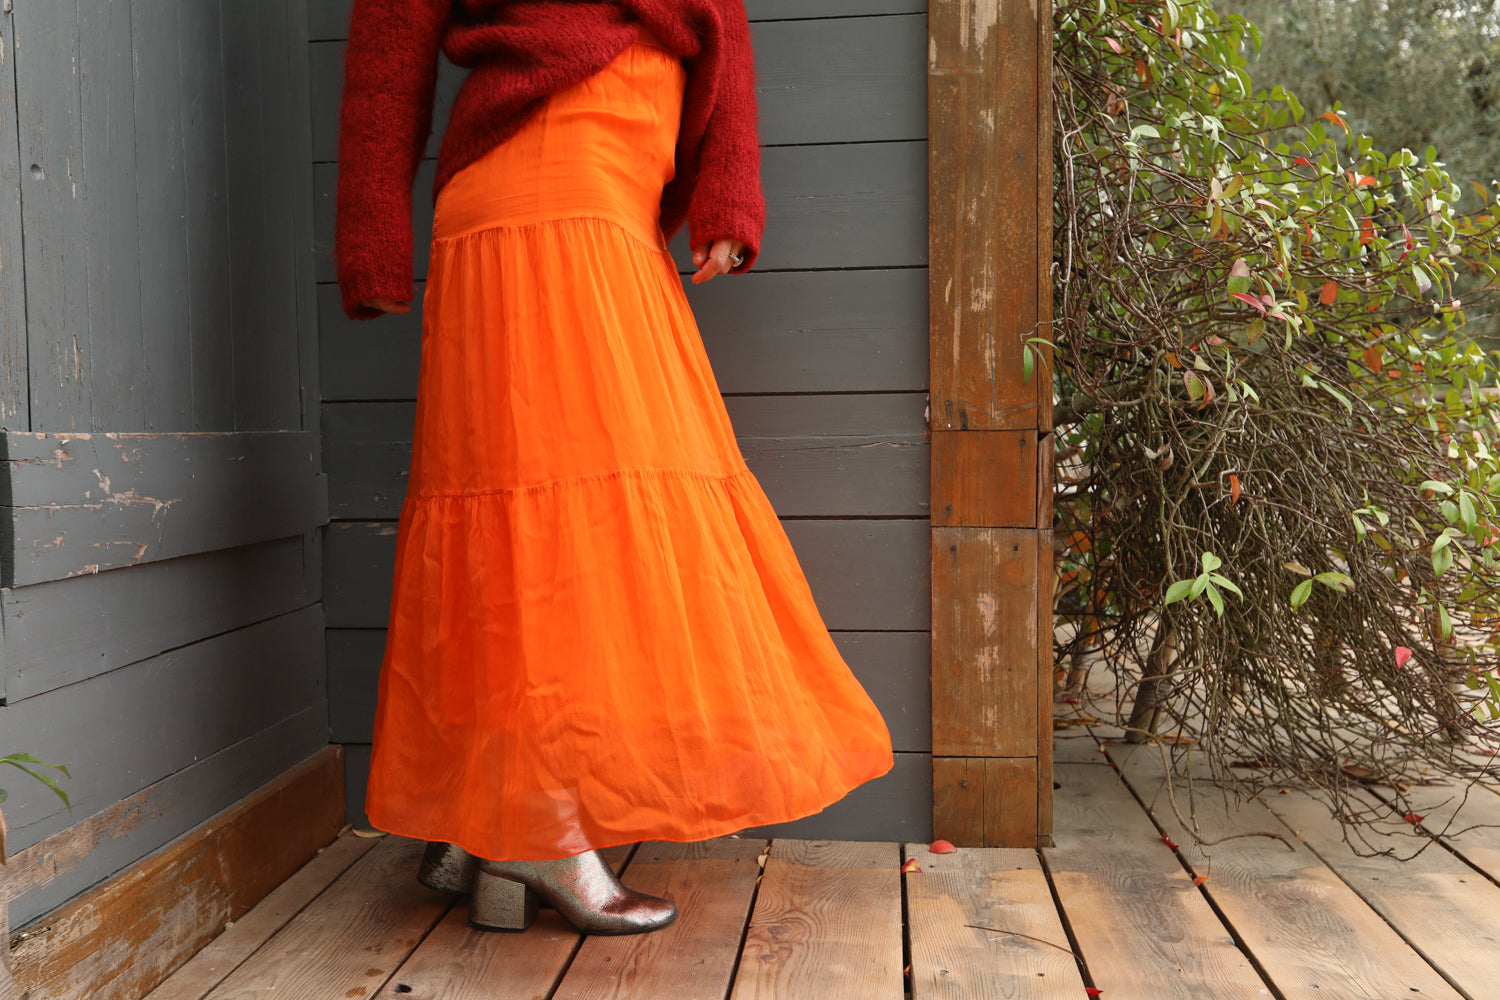 Pumpkin Spice Vintage Early 00s Tiered Maxi Skirt